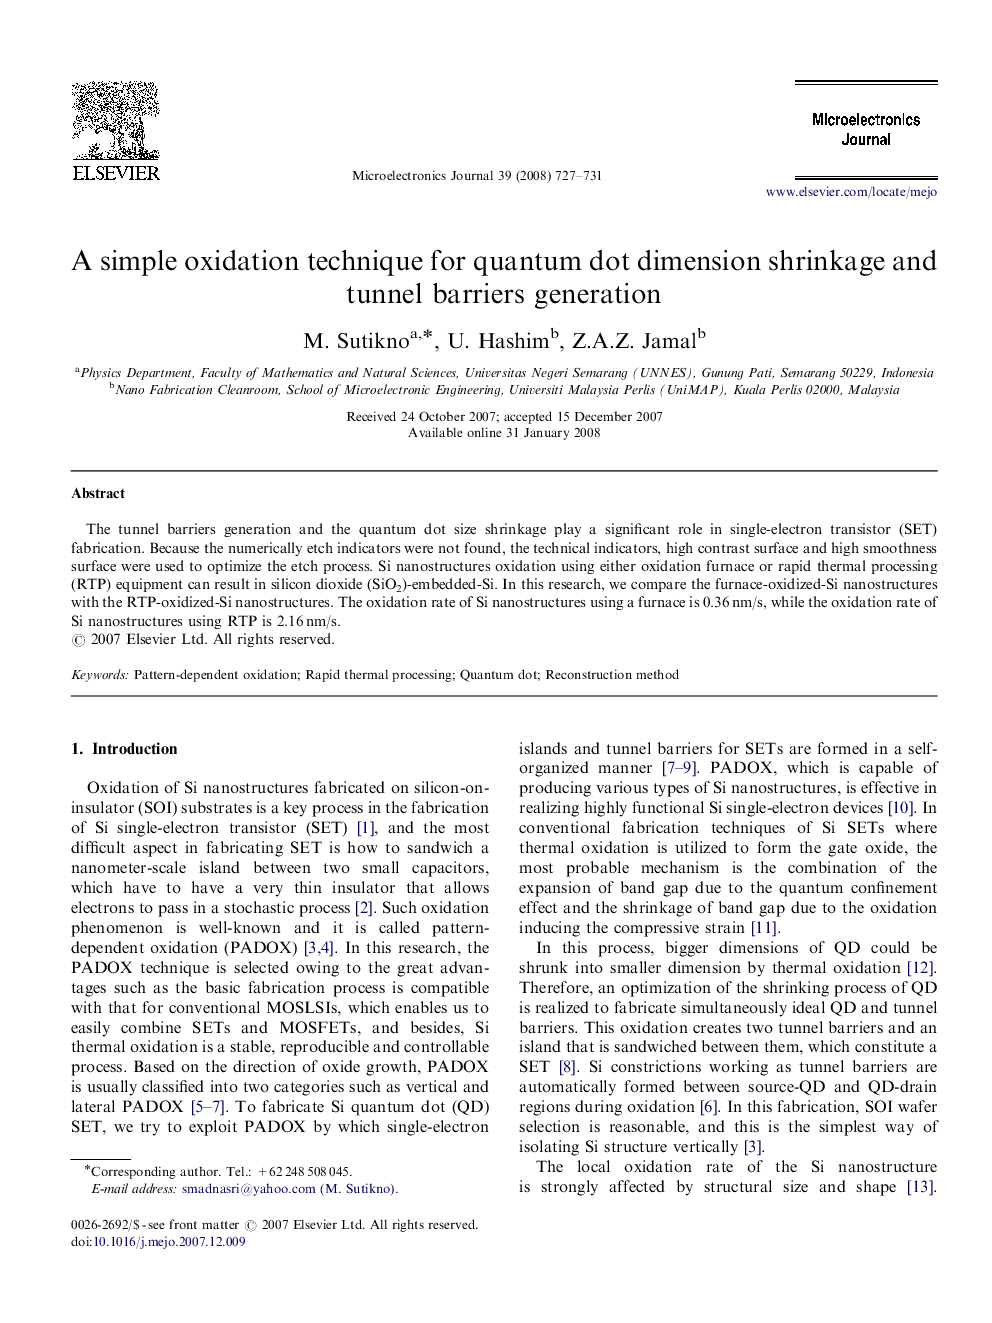 A simple oxidation technique for quantum dot dimension shrinkage and tunnel barriers generation